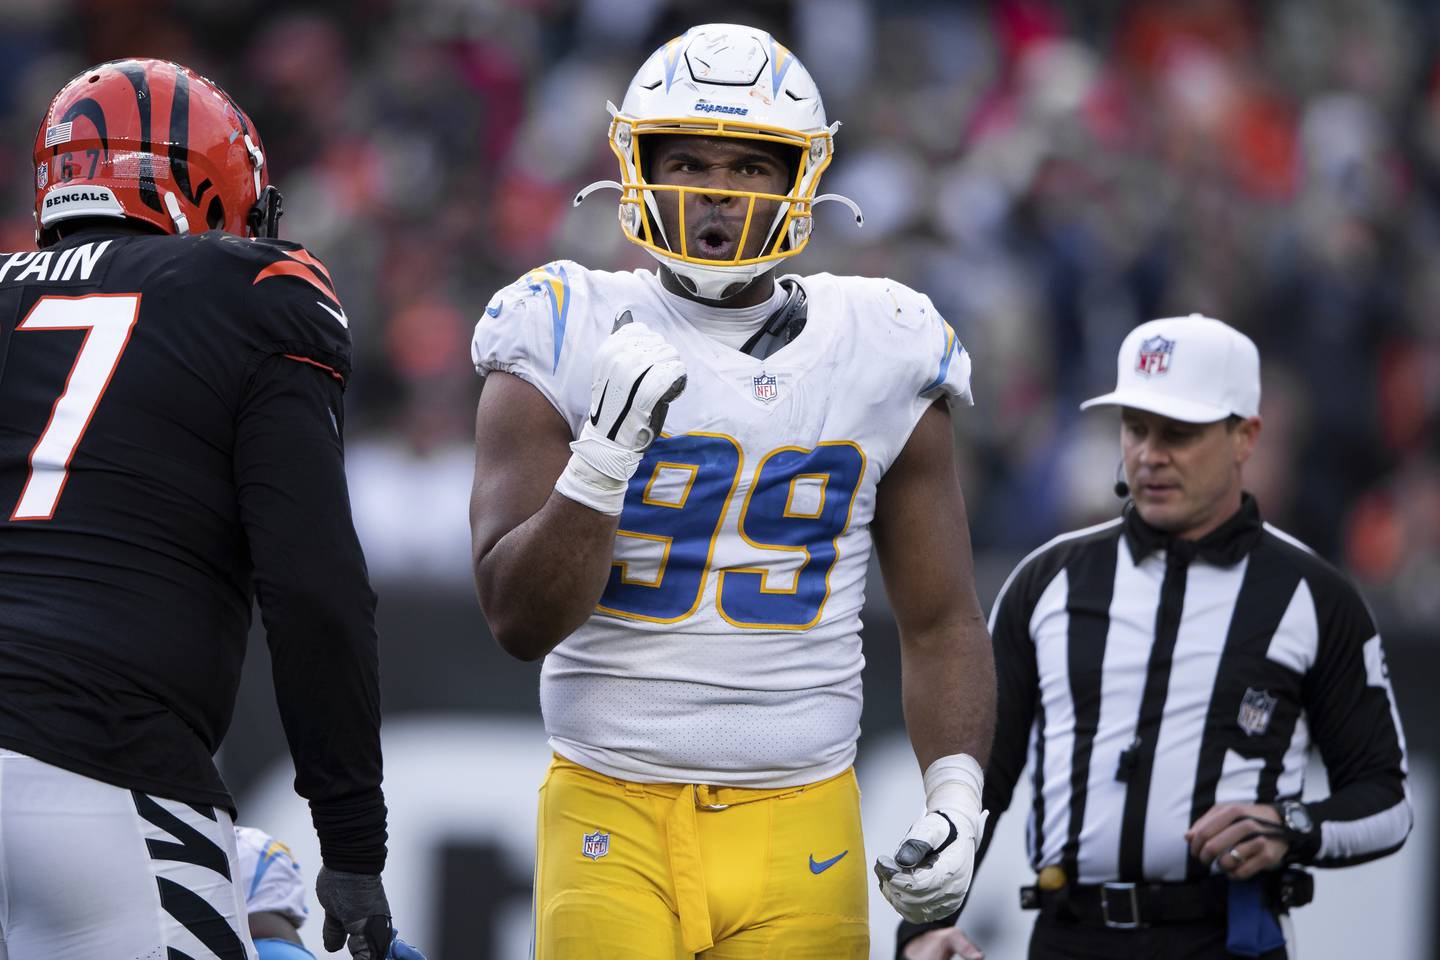 Chargers defensive lineman Jerry Tillery celebrates a sack during against the Bengals on Dec. 5, 2021.